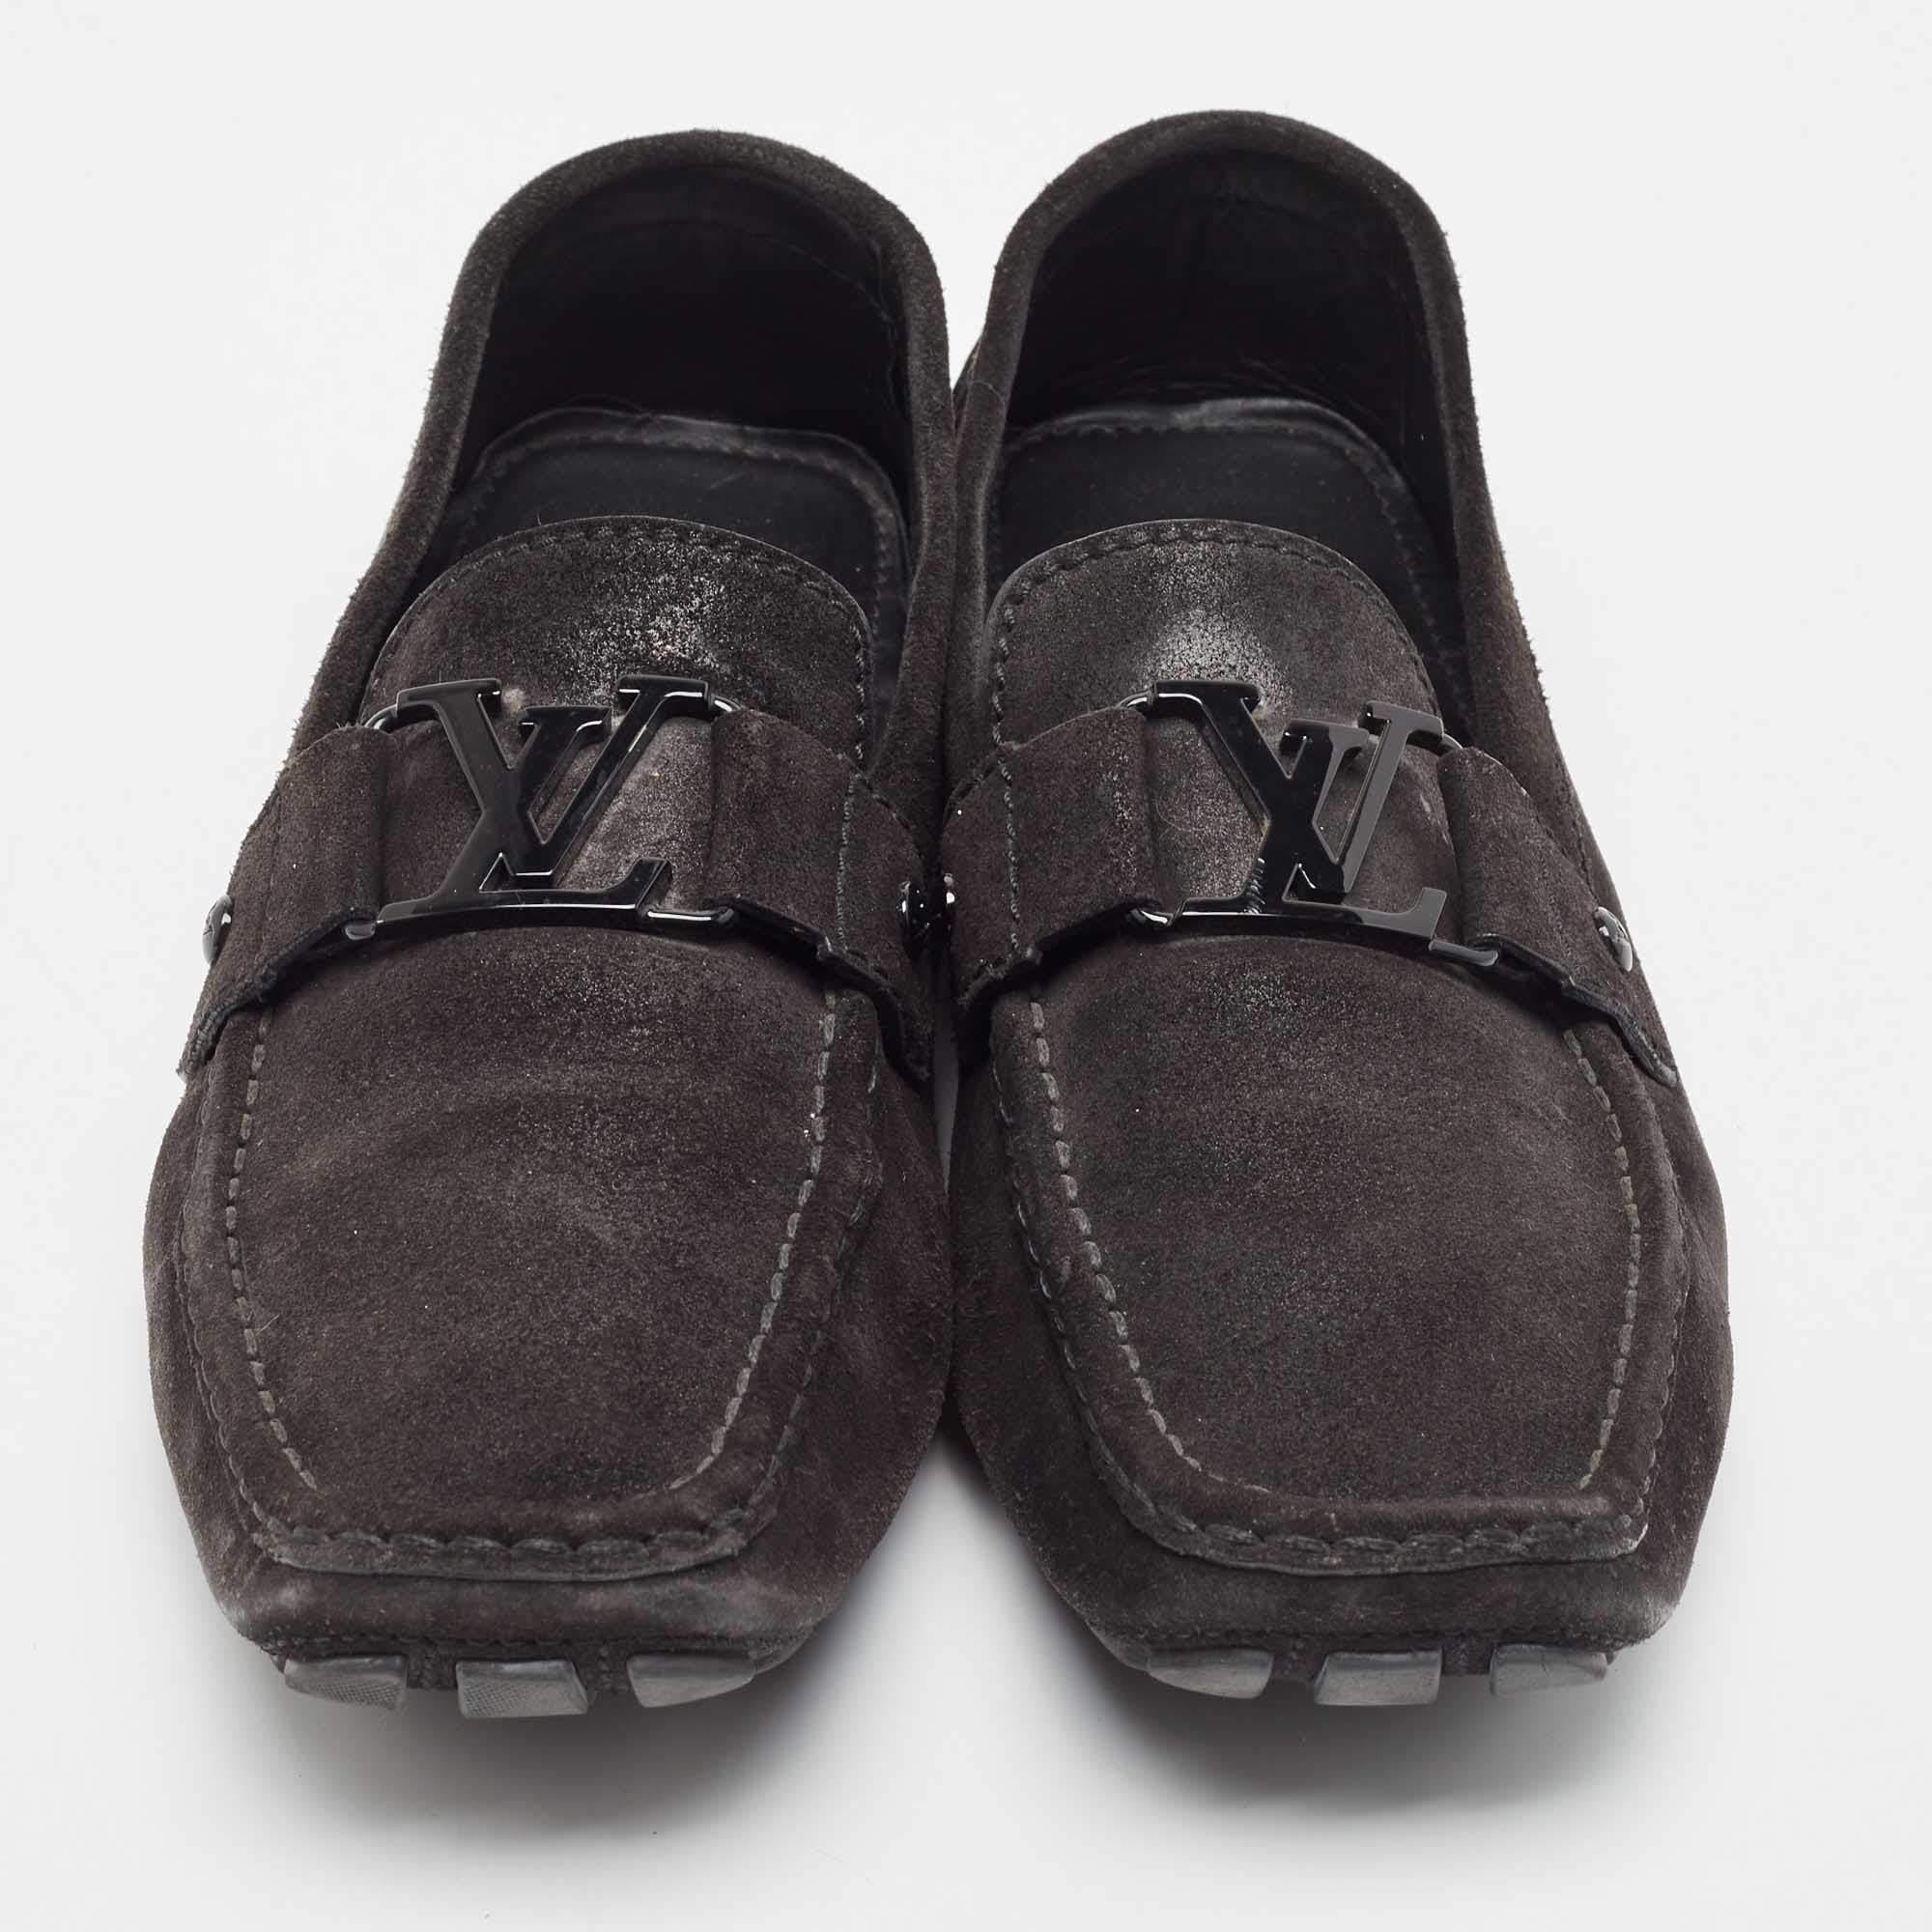 Let this comfortable pair be your first choice when you're out for a long day. These LV shoes have well-sewn uppers beautifully set on durable soles.

